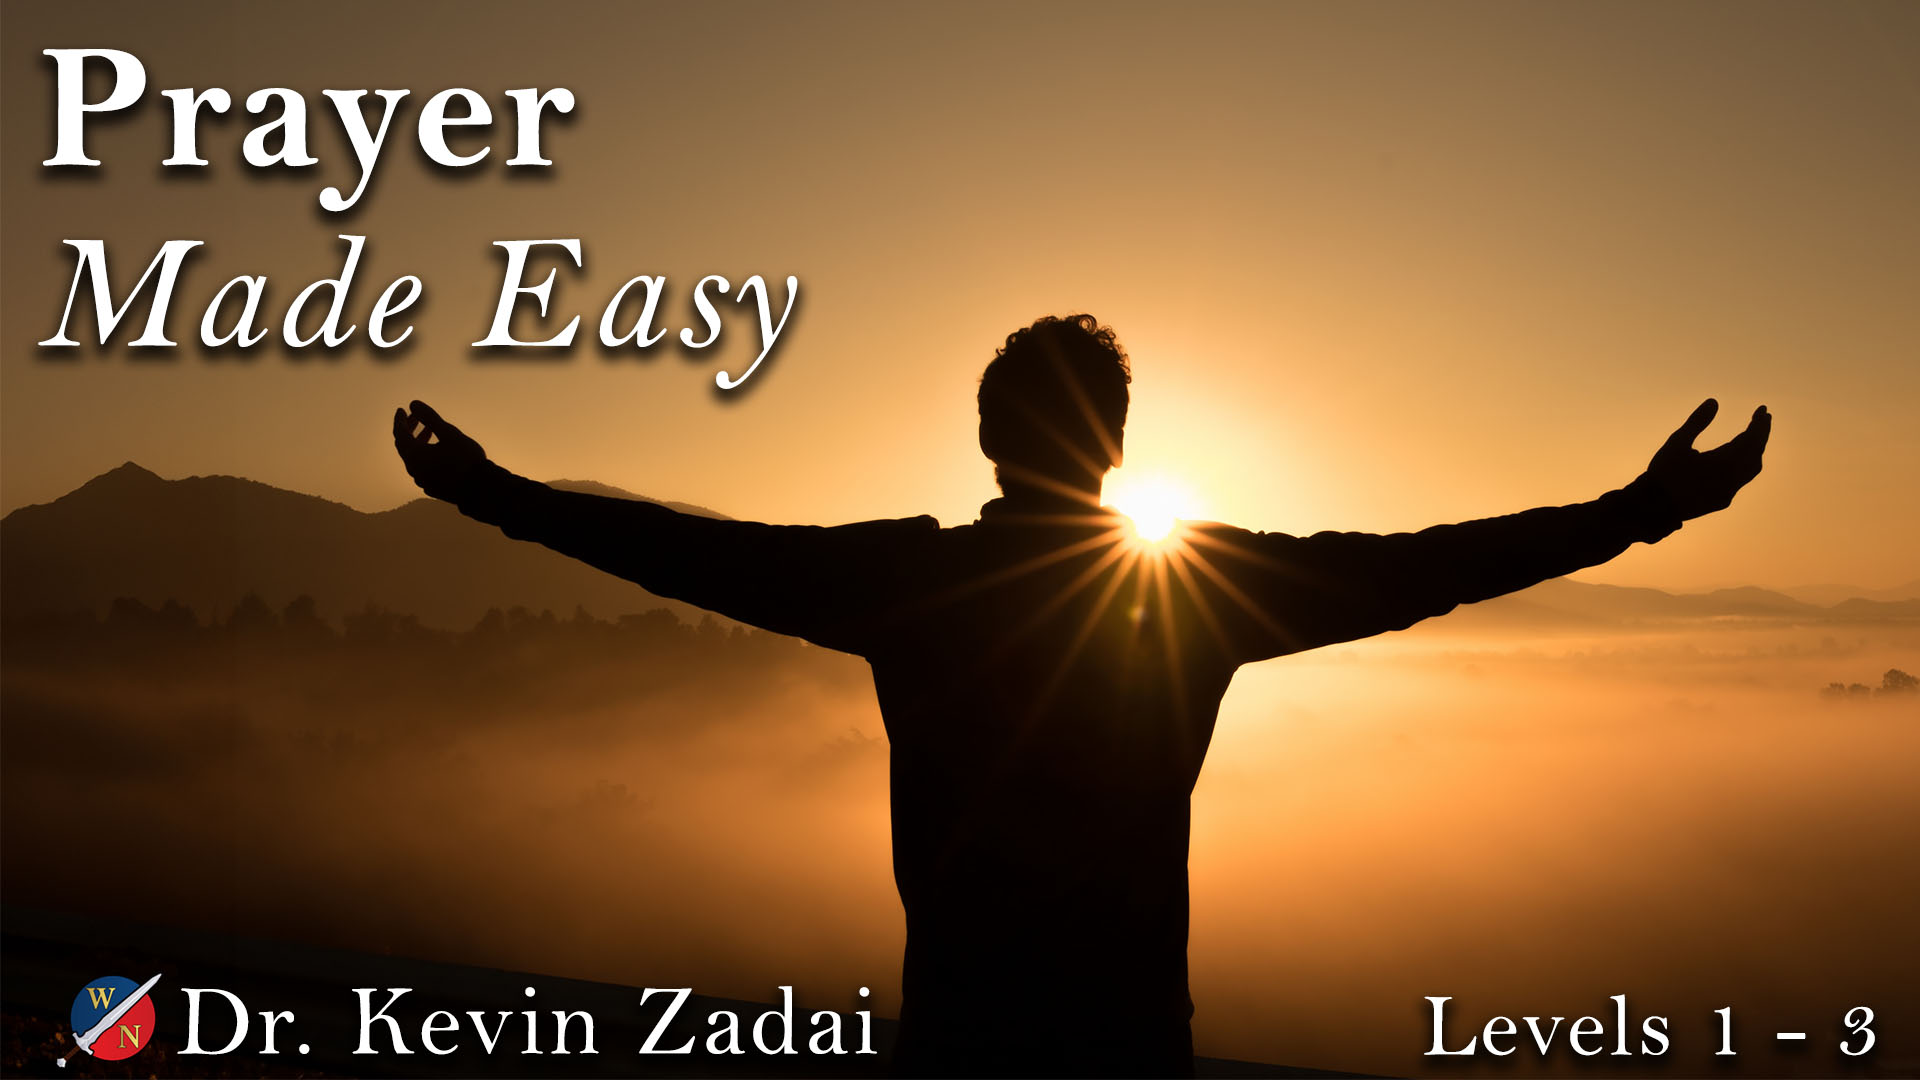 Prayer Made Easy bundle with Dr. Kevin Zadai